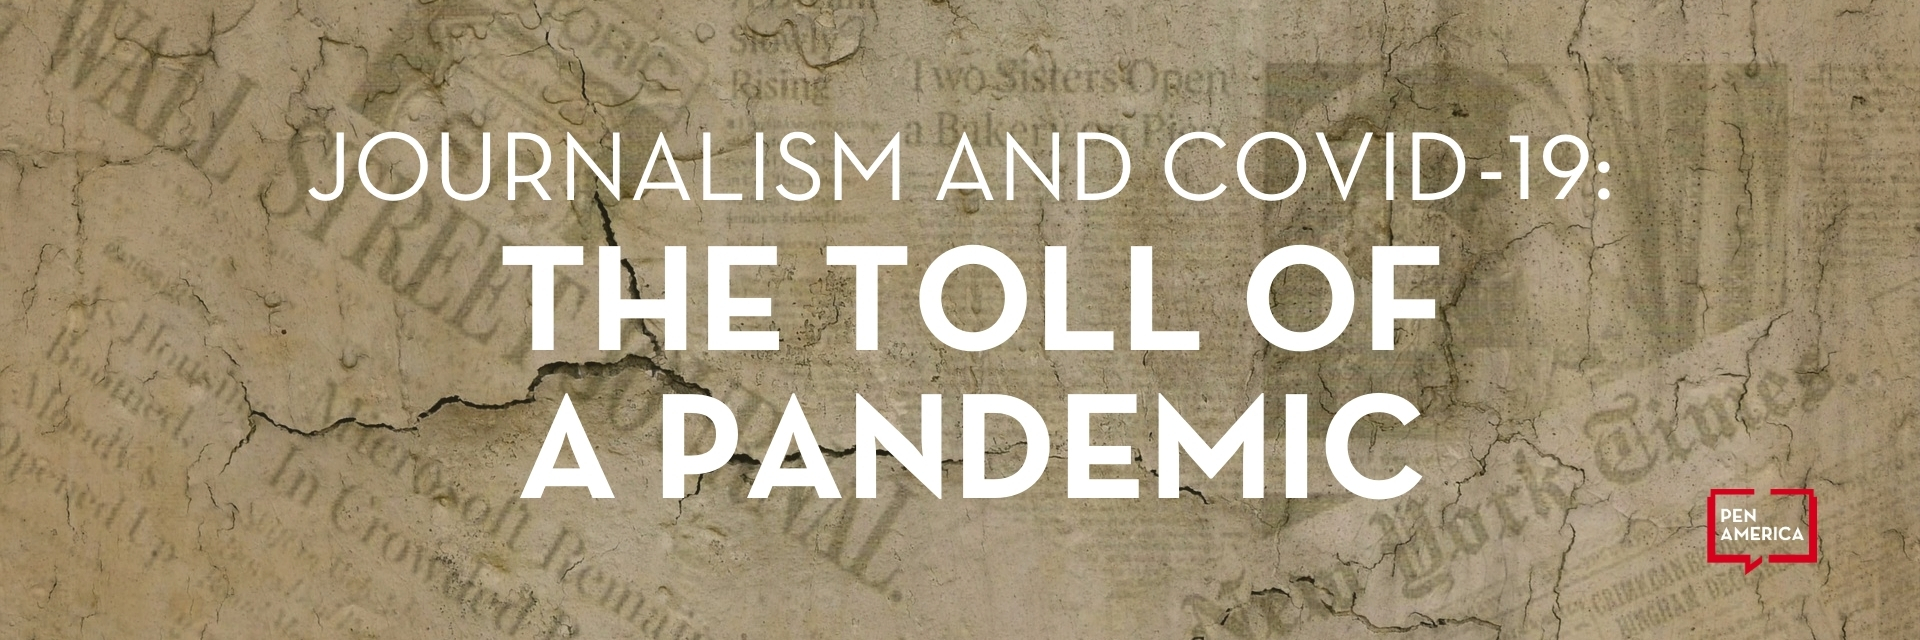 The text “Journalism and COVID-19: The Toll of a Pandemic” and PEN America’s logo overlaid on a set of distressed newspapers